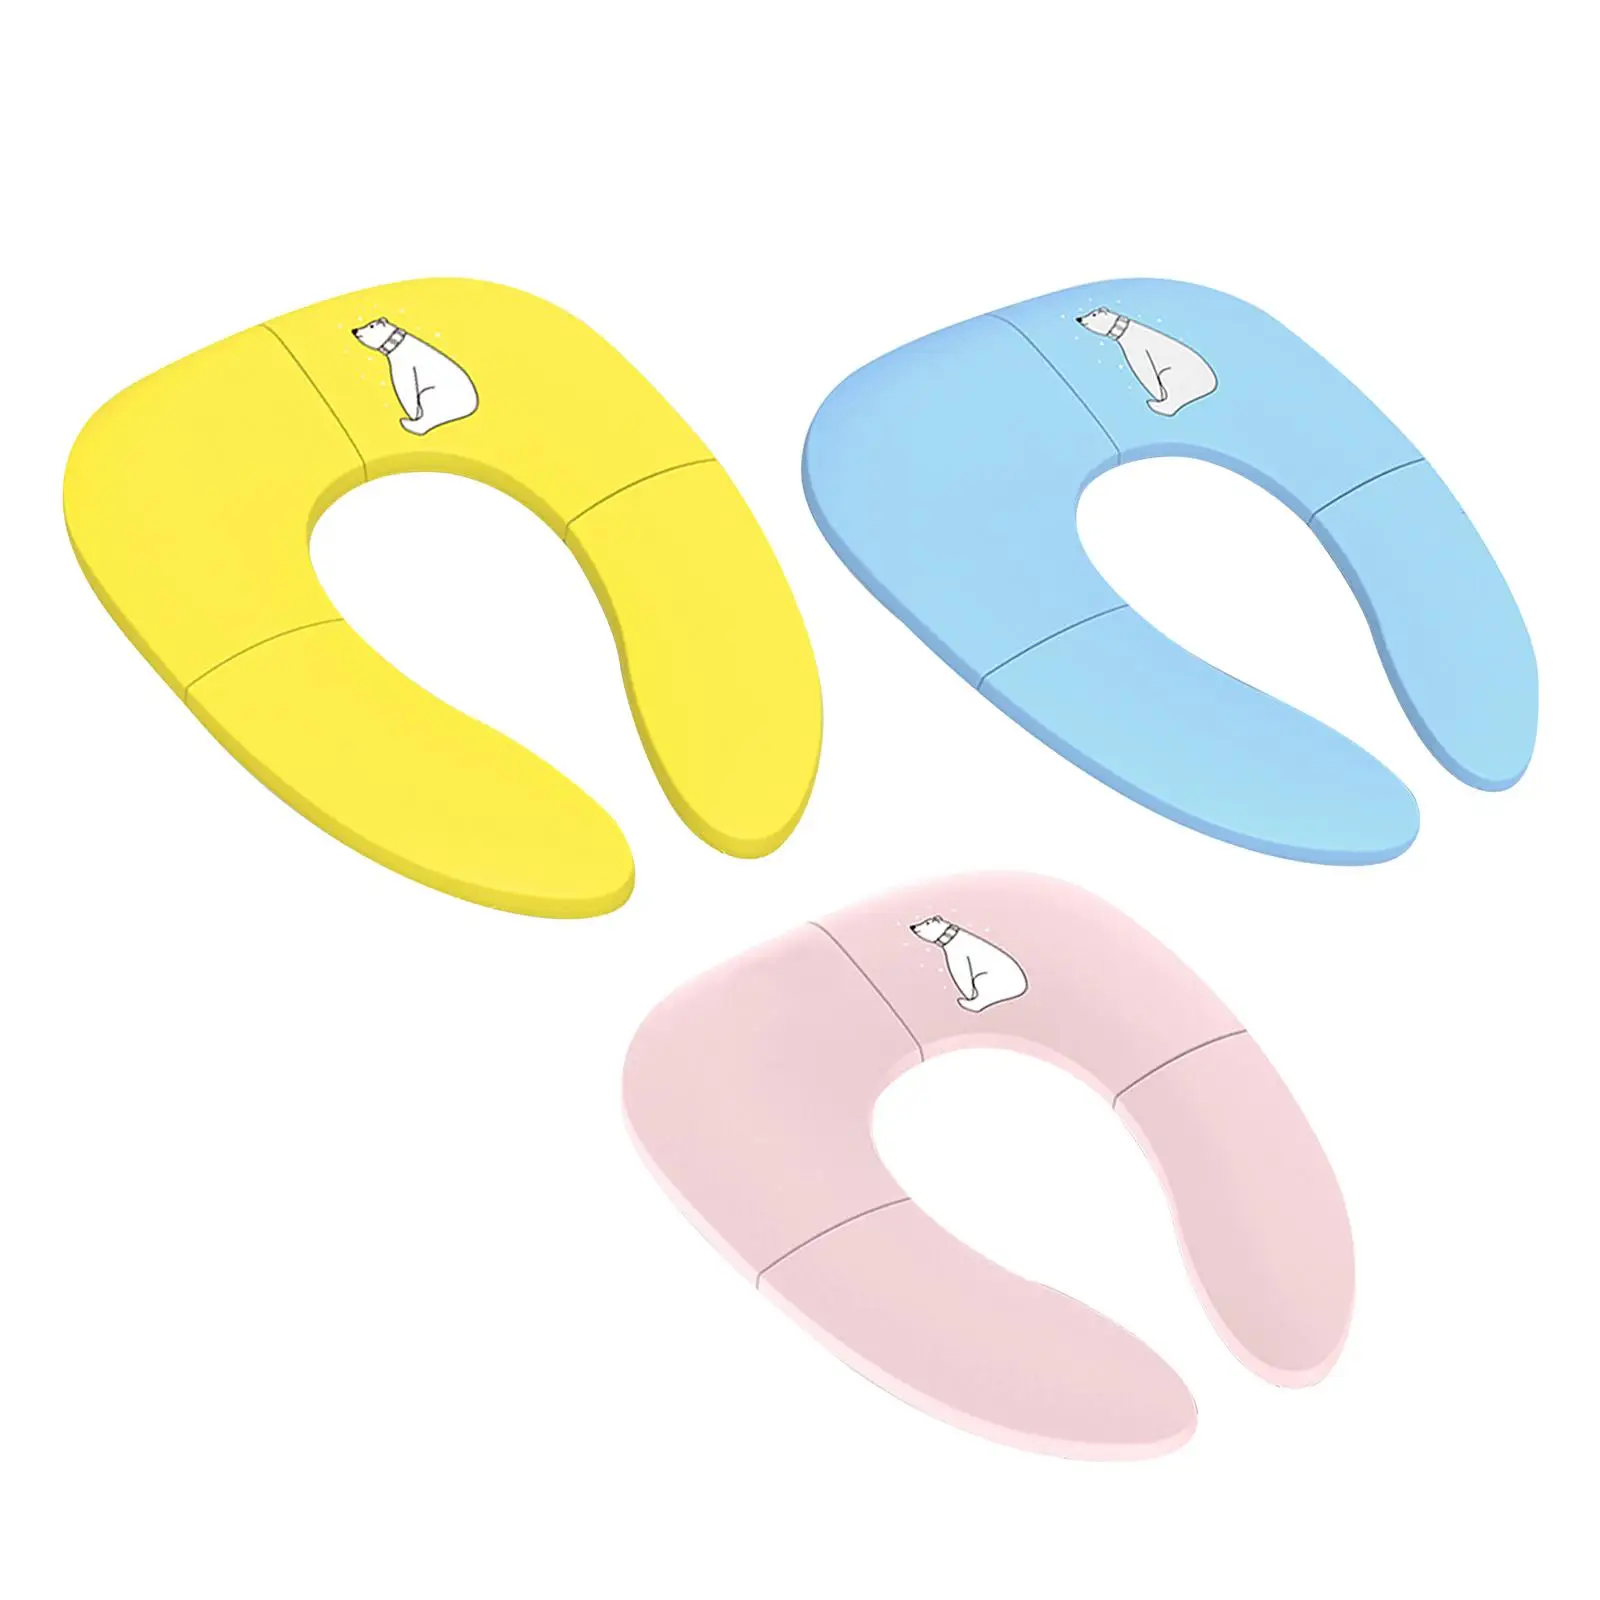 

Foldable Toilet Seat Potty Ring Portable Upgraded Non Slip Toilet Cover for Round and Oval Toilets travel Use Girls Adults